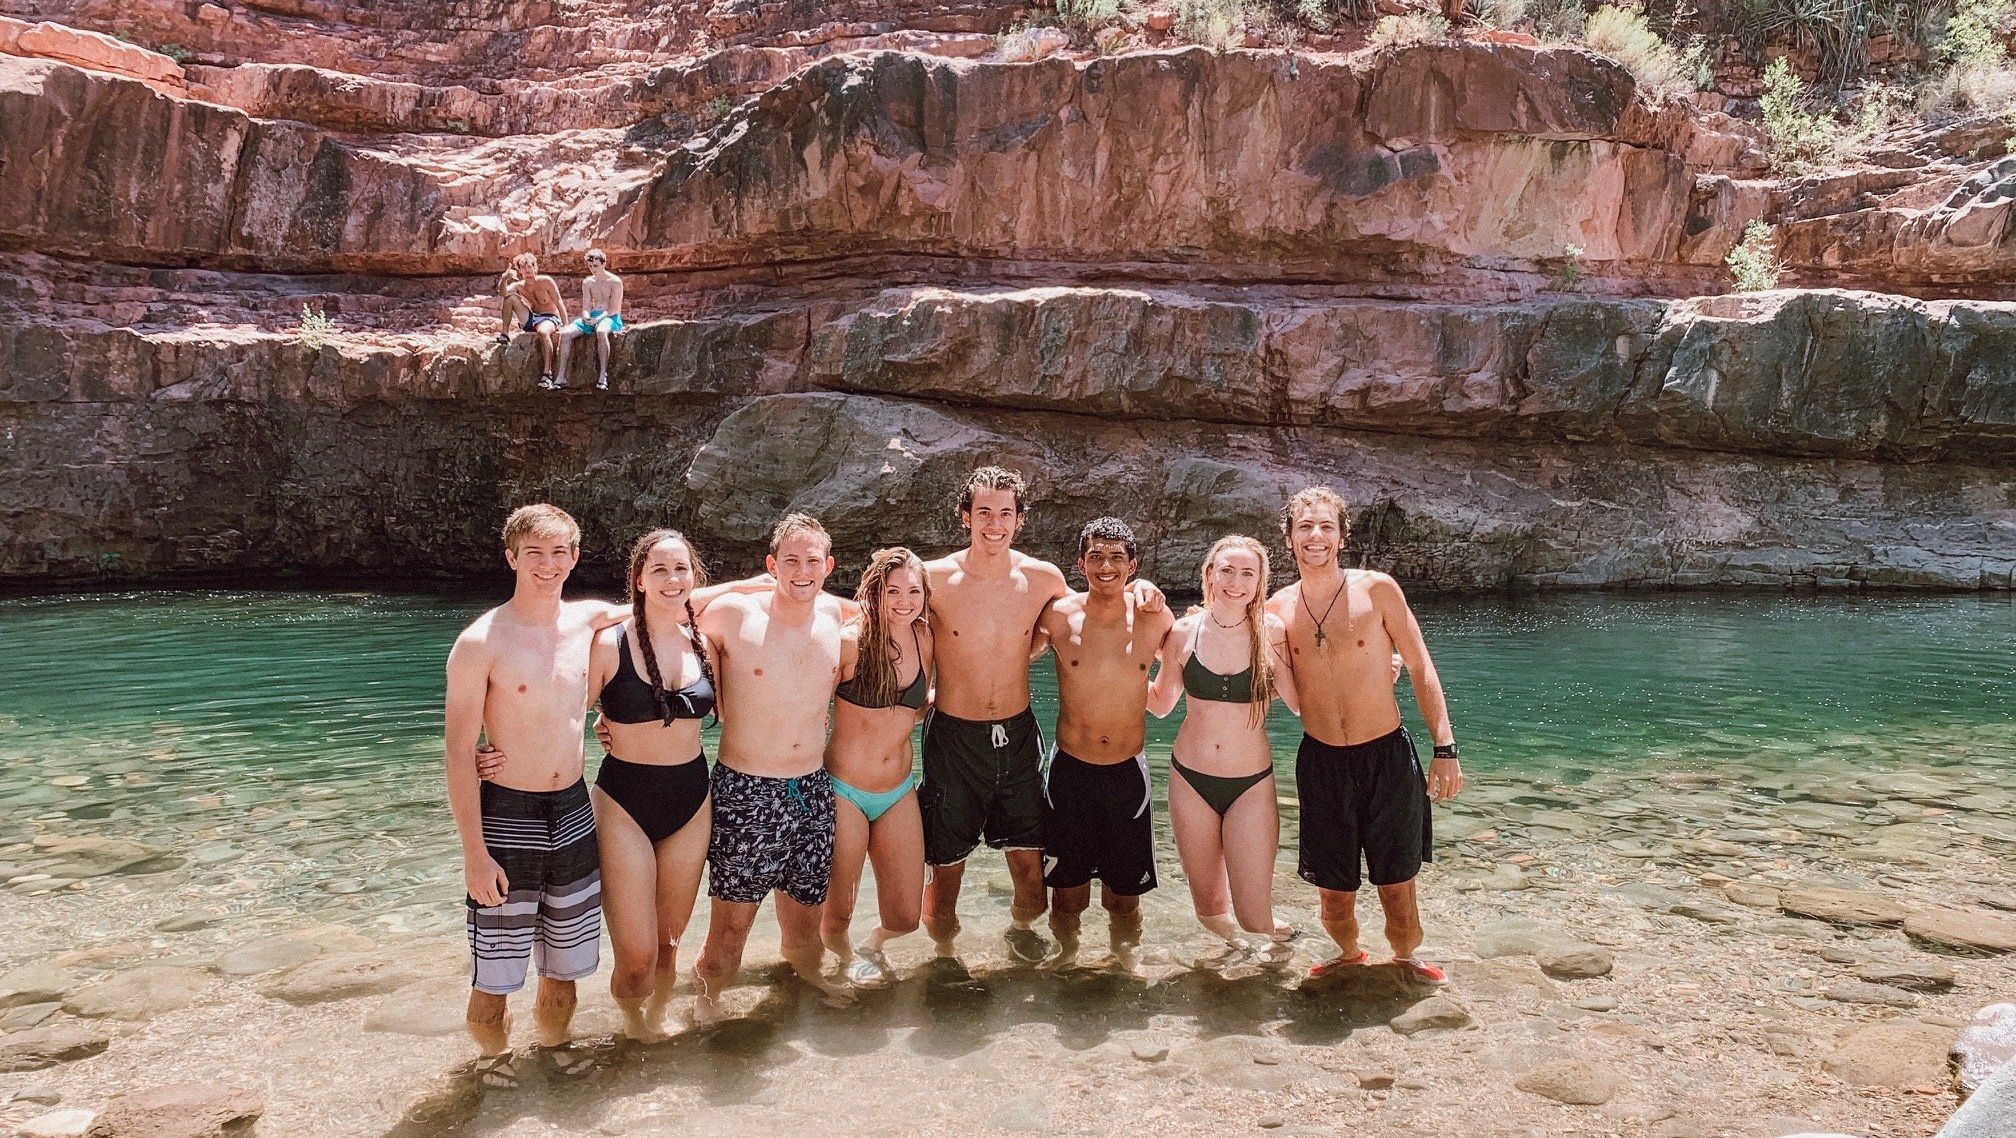 My Friends Peer-Pressured Me To Jump Off A Cliff In Sedona